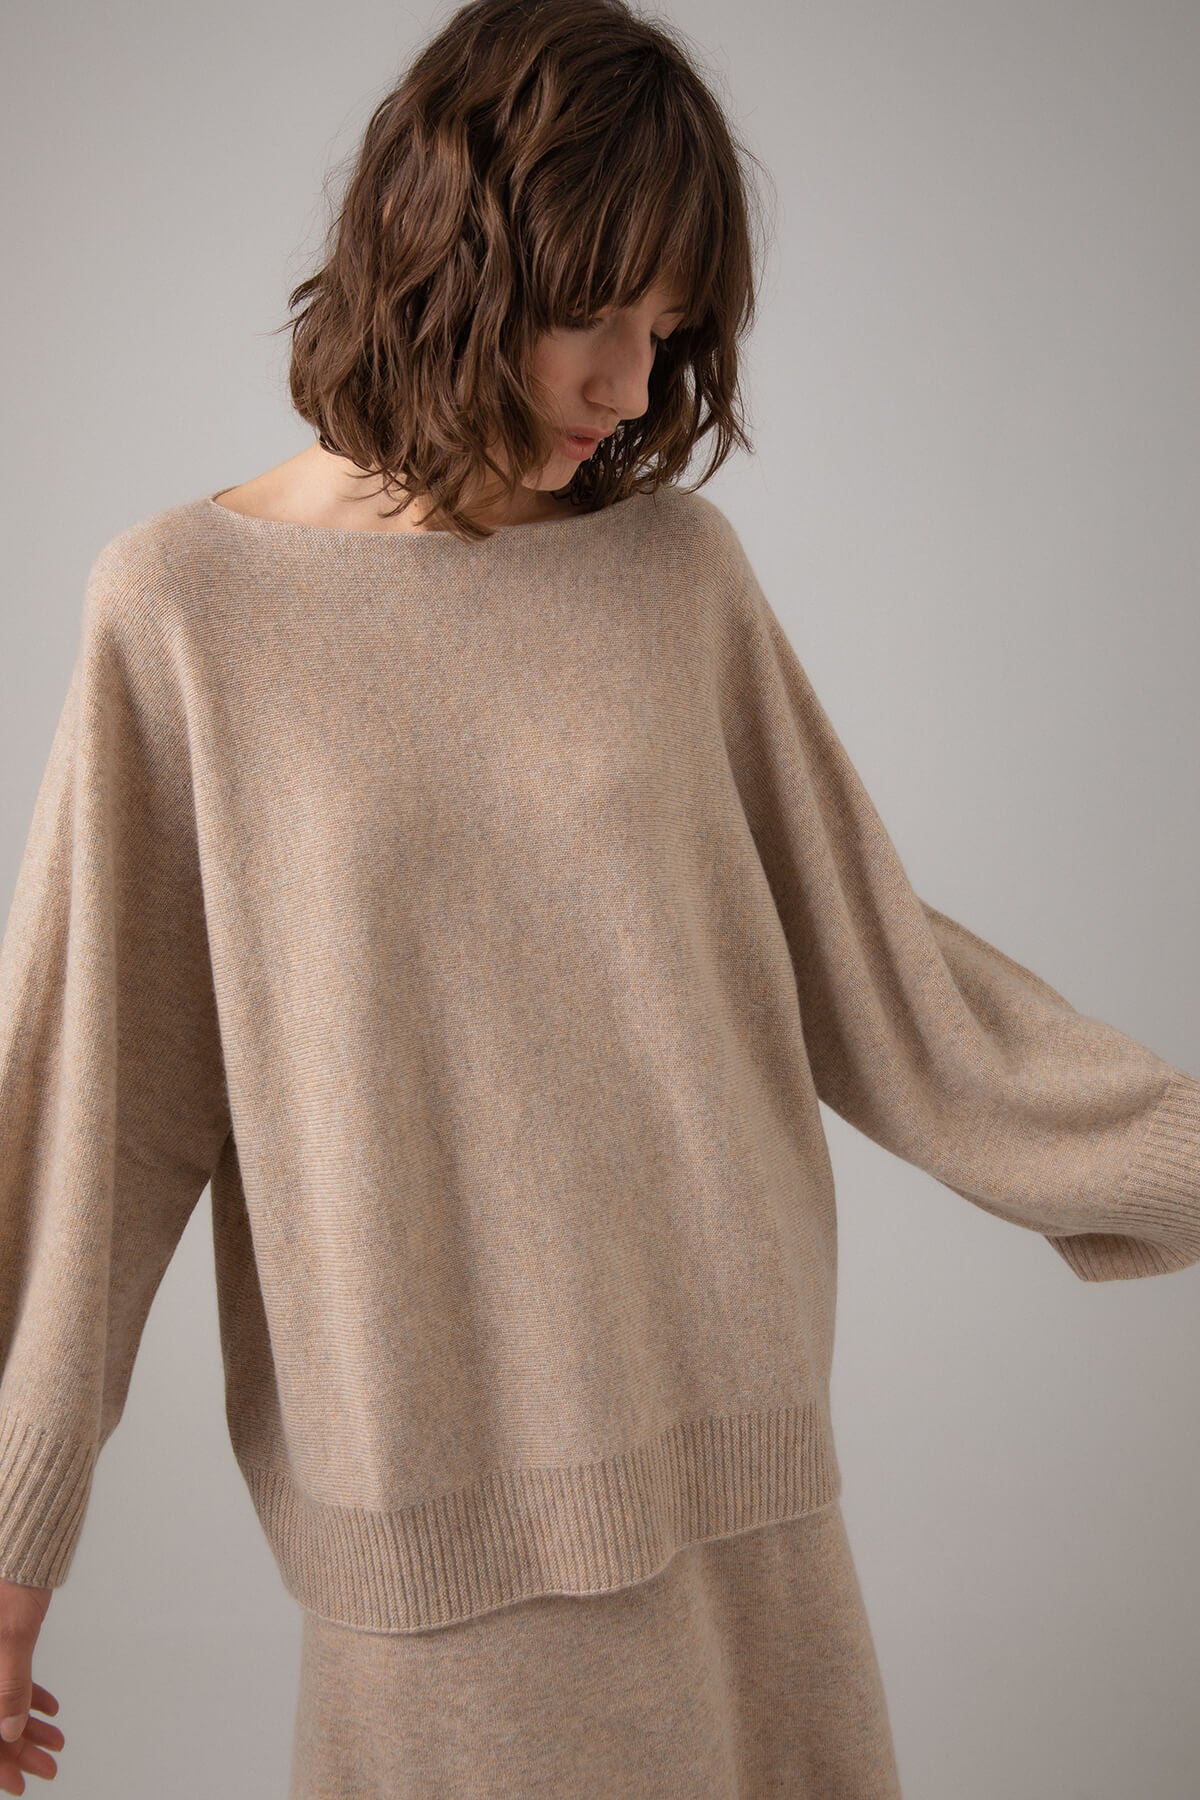 Johnstons of Elgin Boat Neck Cashmere Cape Jumper in Oatmeal on a grey background KAI05048HB0210